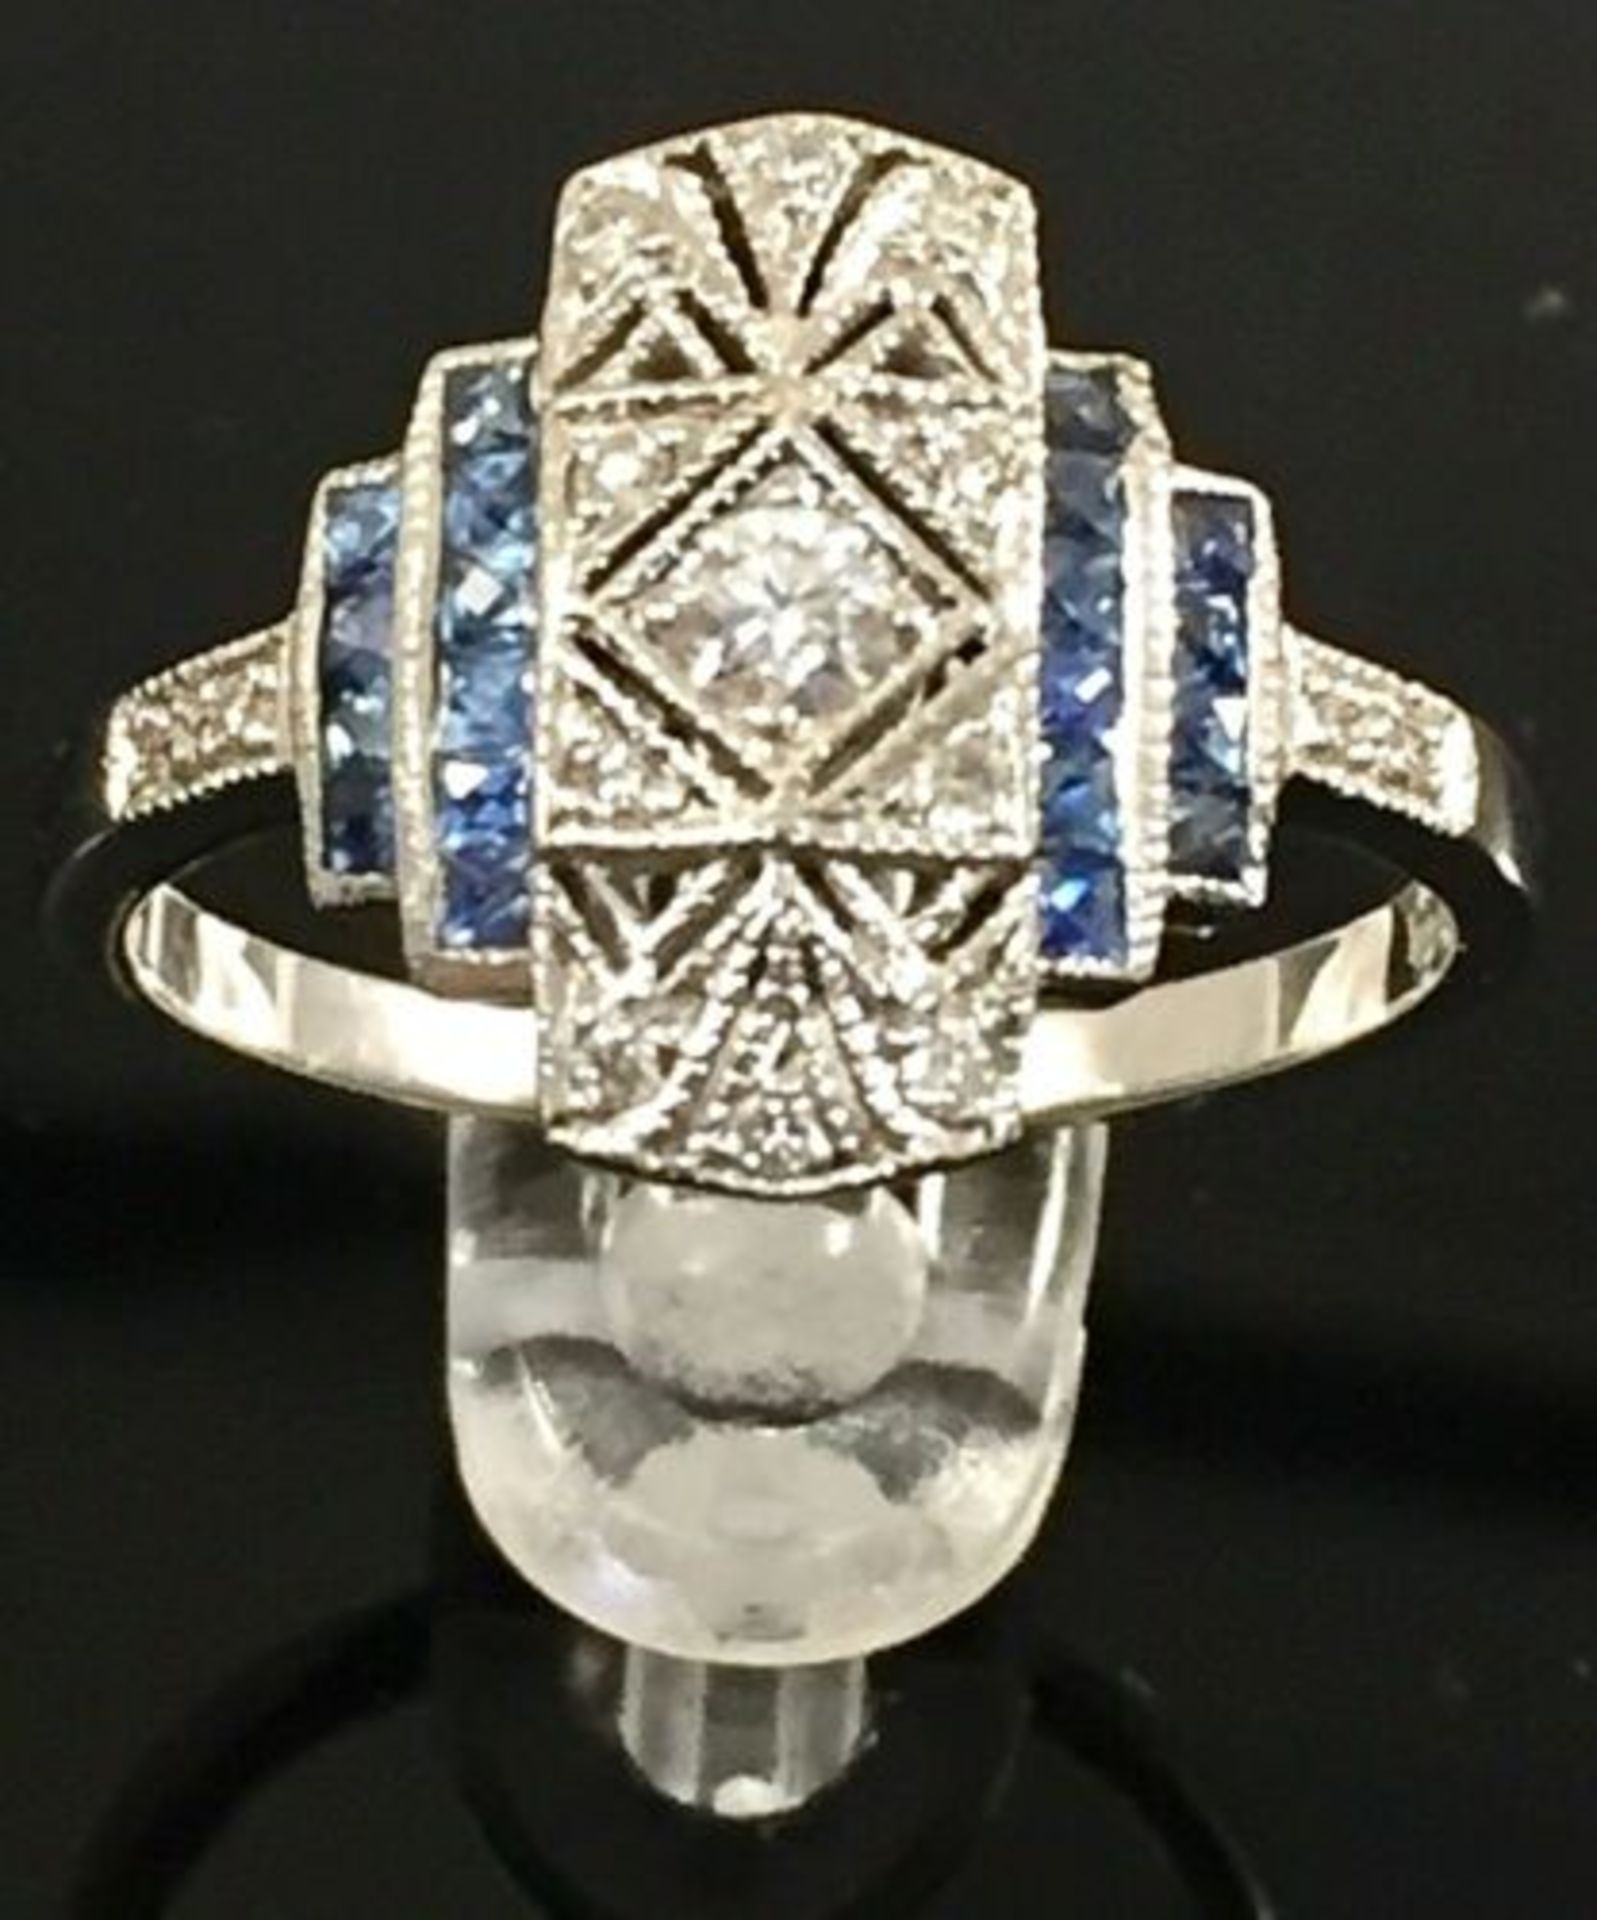 DIAMOND AND SAPPHIRE ART NOUVEAU STYLE DRESS RING IN WHITE GOLD